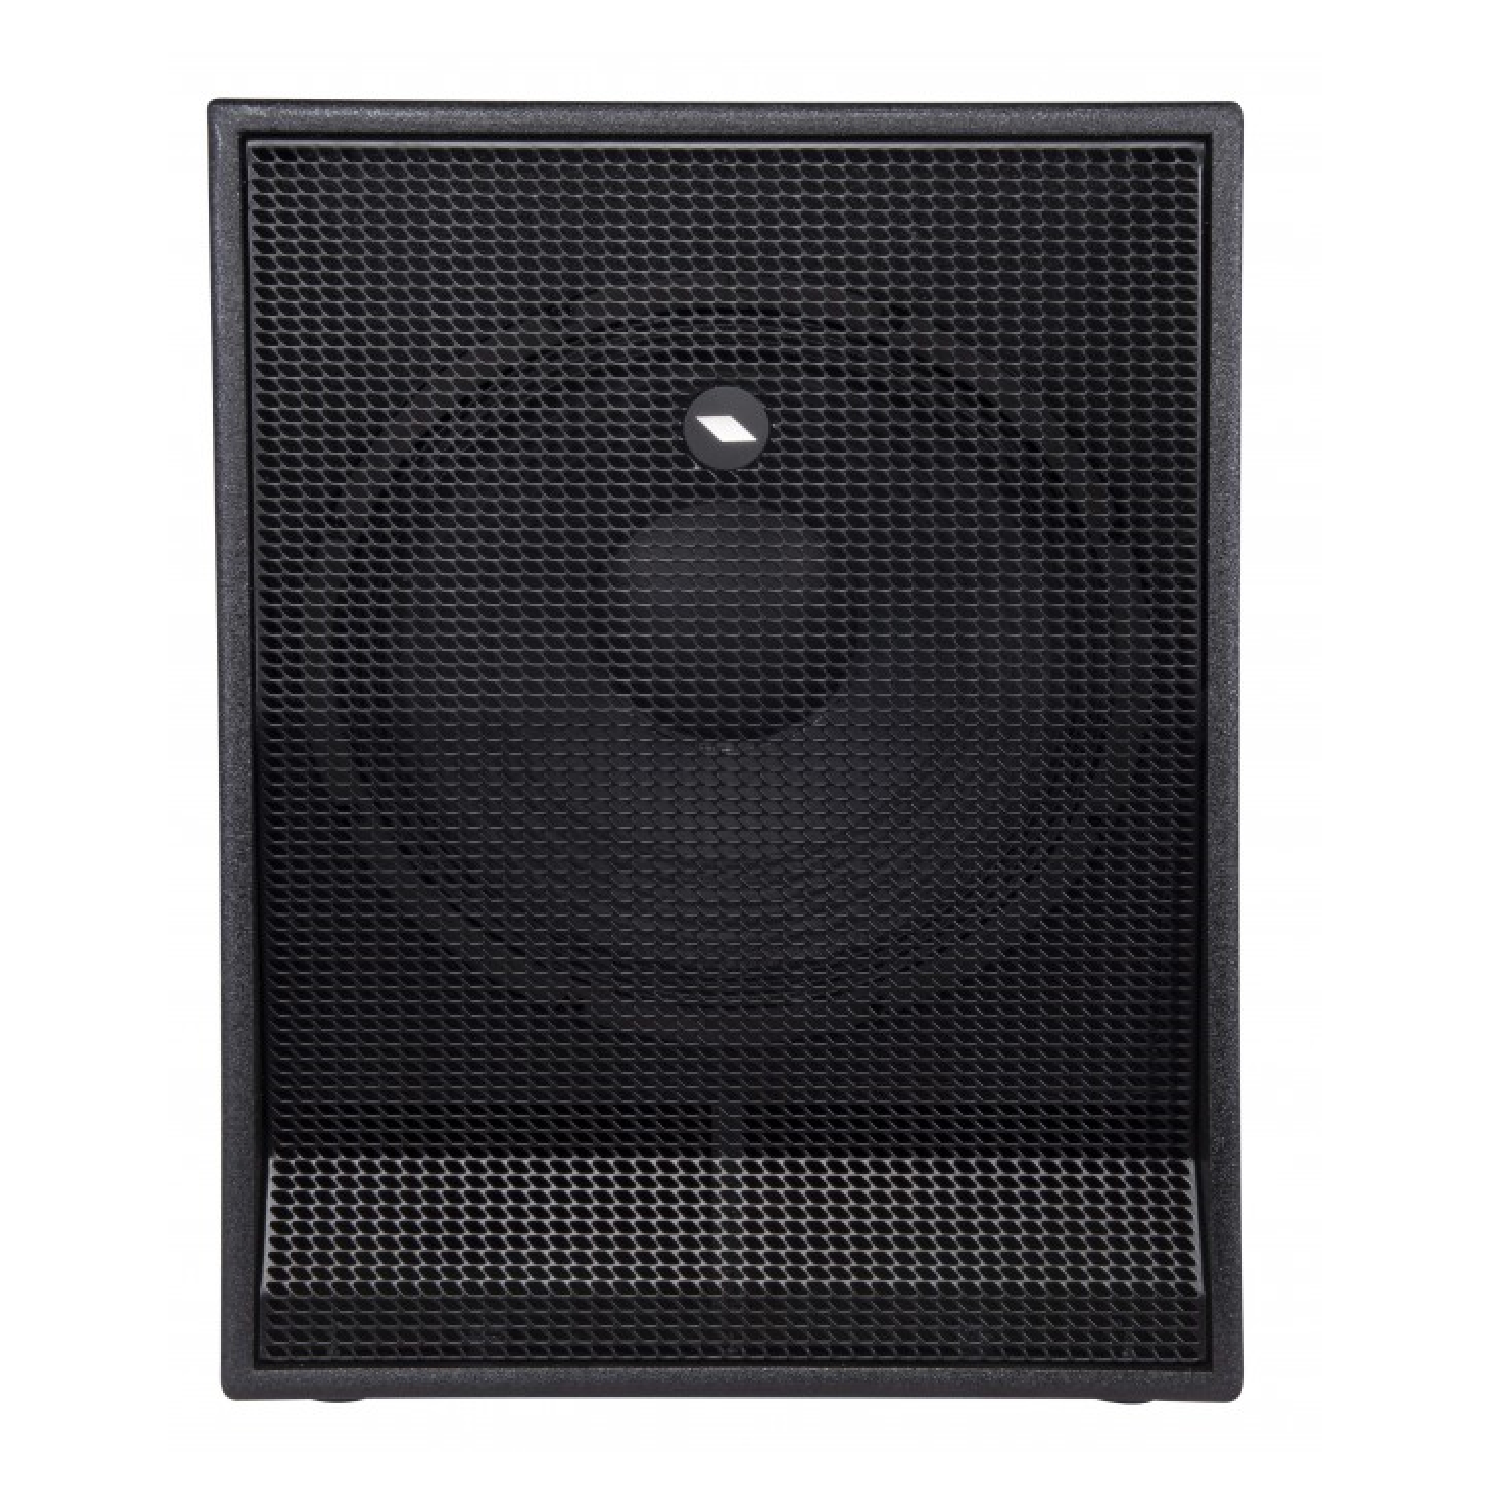 15 Inches Woofer Hybrid BandPass Active Subwoofer 1200W Peak Power   S15A proel